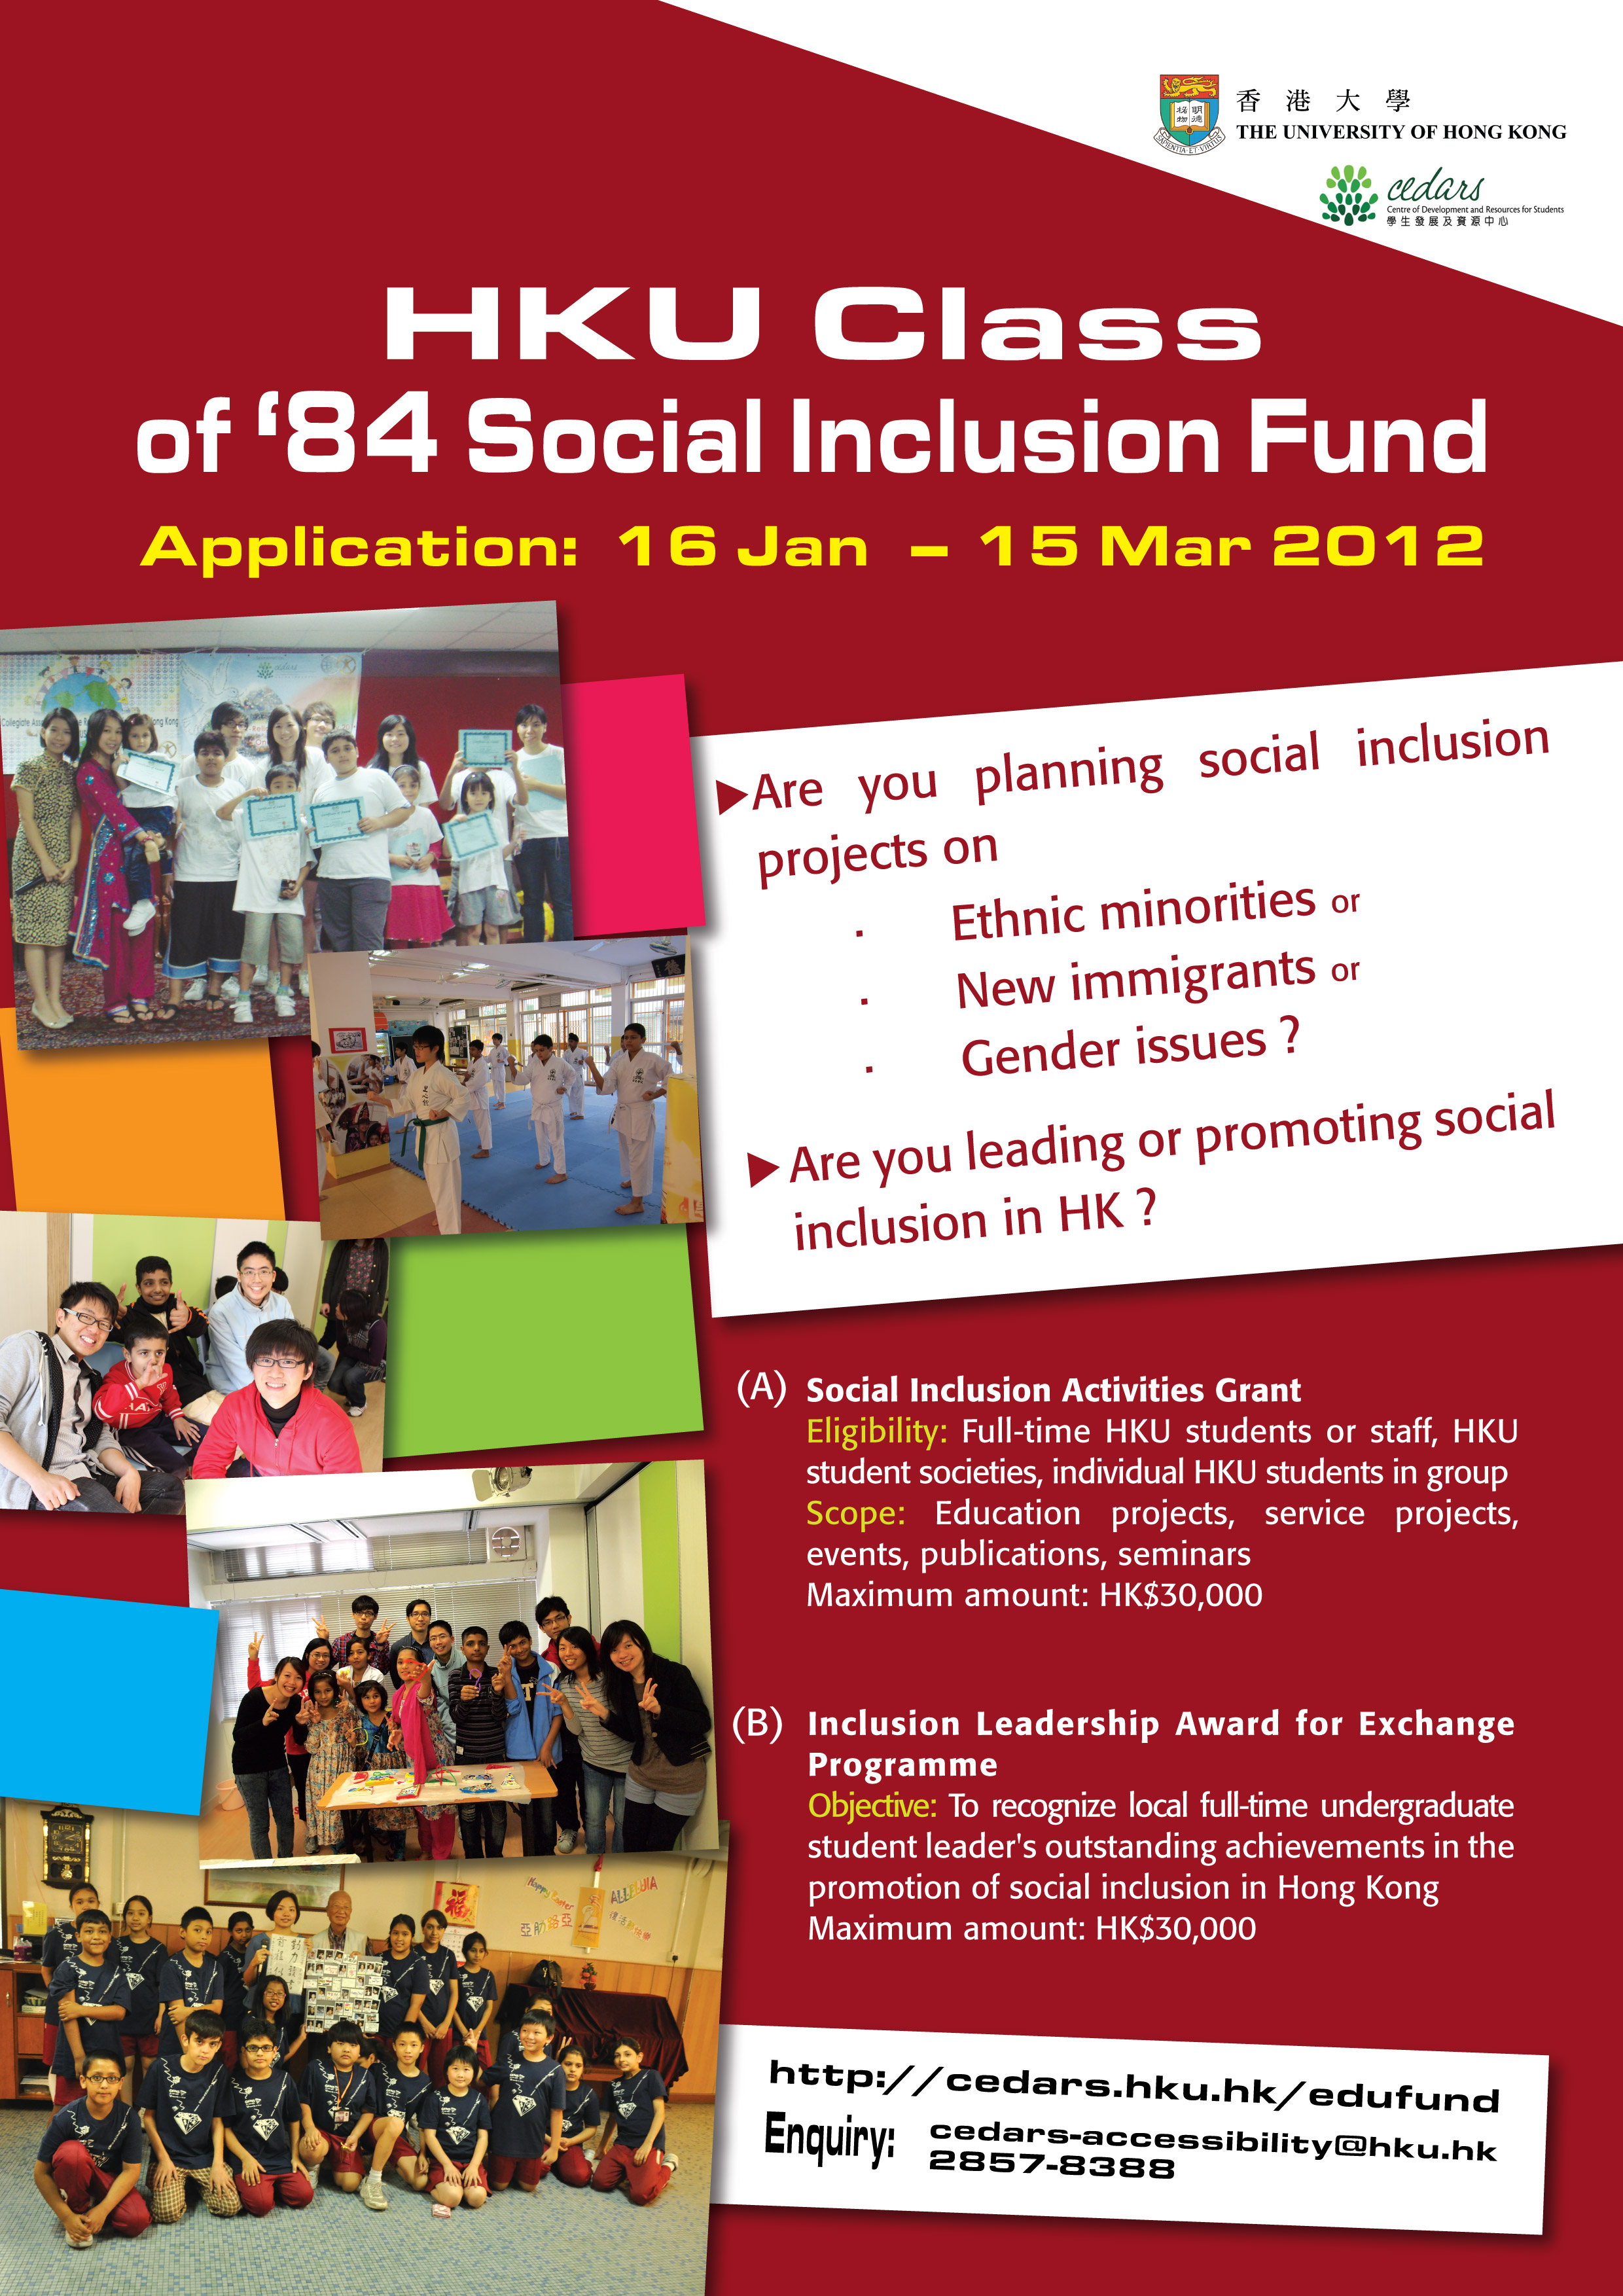 HKU Class of 84 Social Inclusion Fund is now open for application!